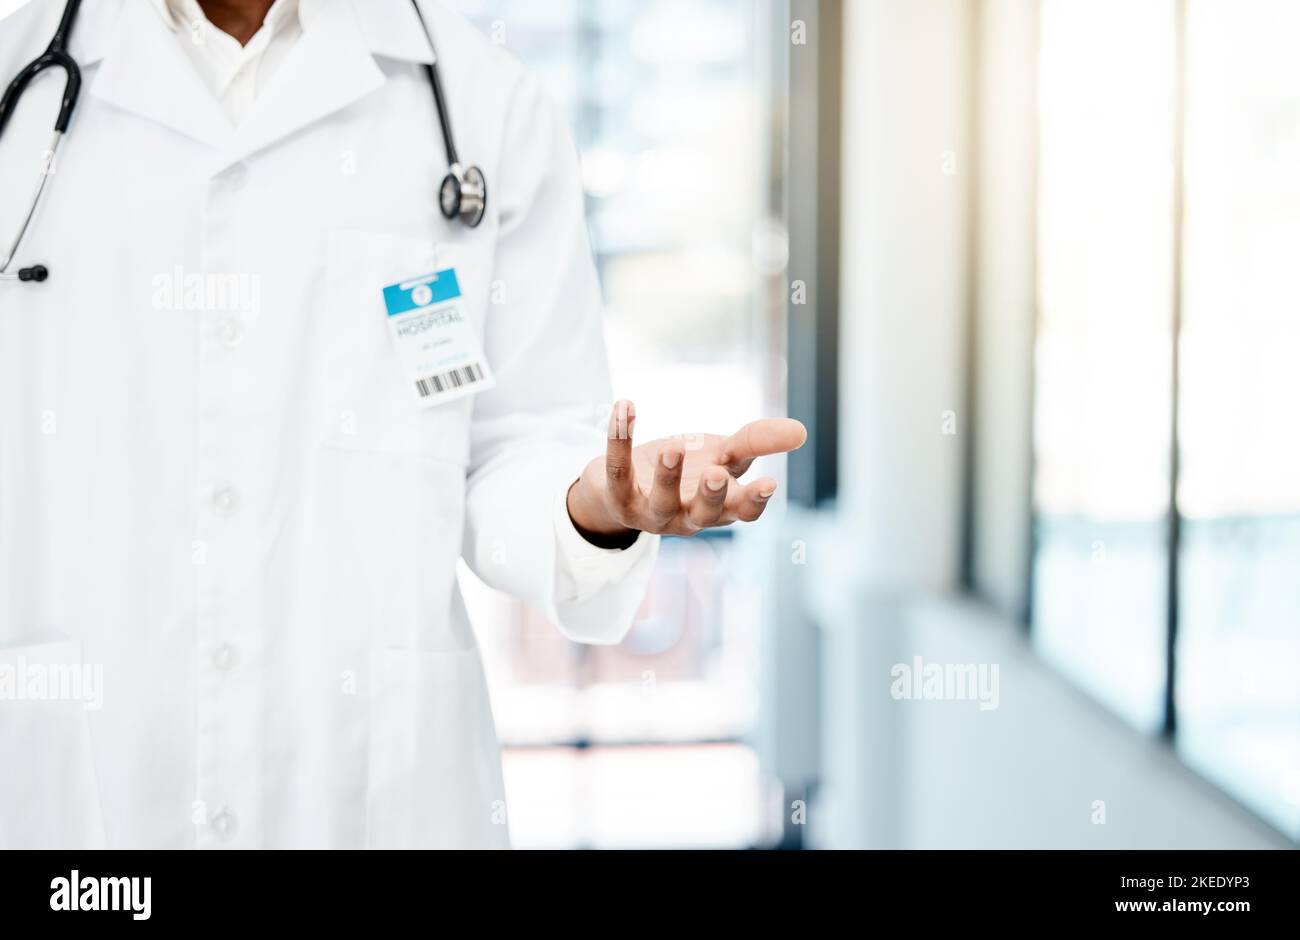 Product placement, confused and hand of a doctor marketing insurance, healthcare and medicine. Advertising, medical and hospital worker with mockup Stock Photo